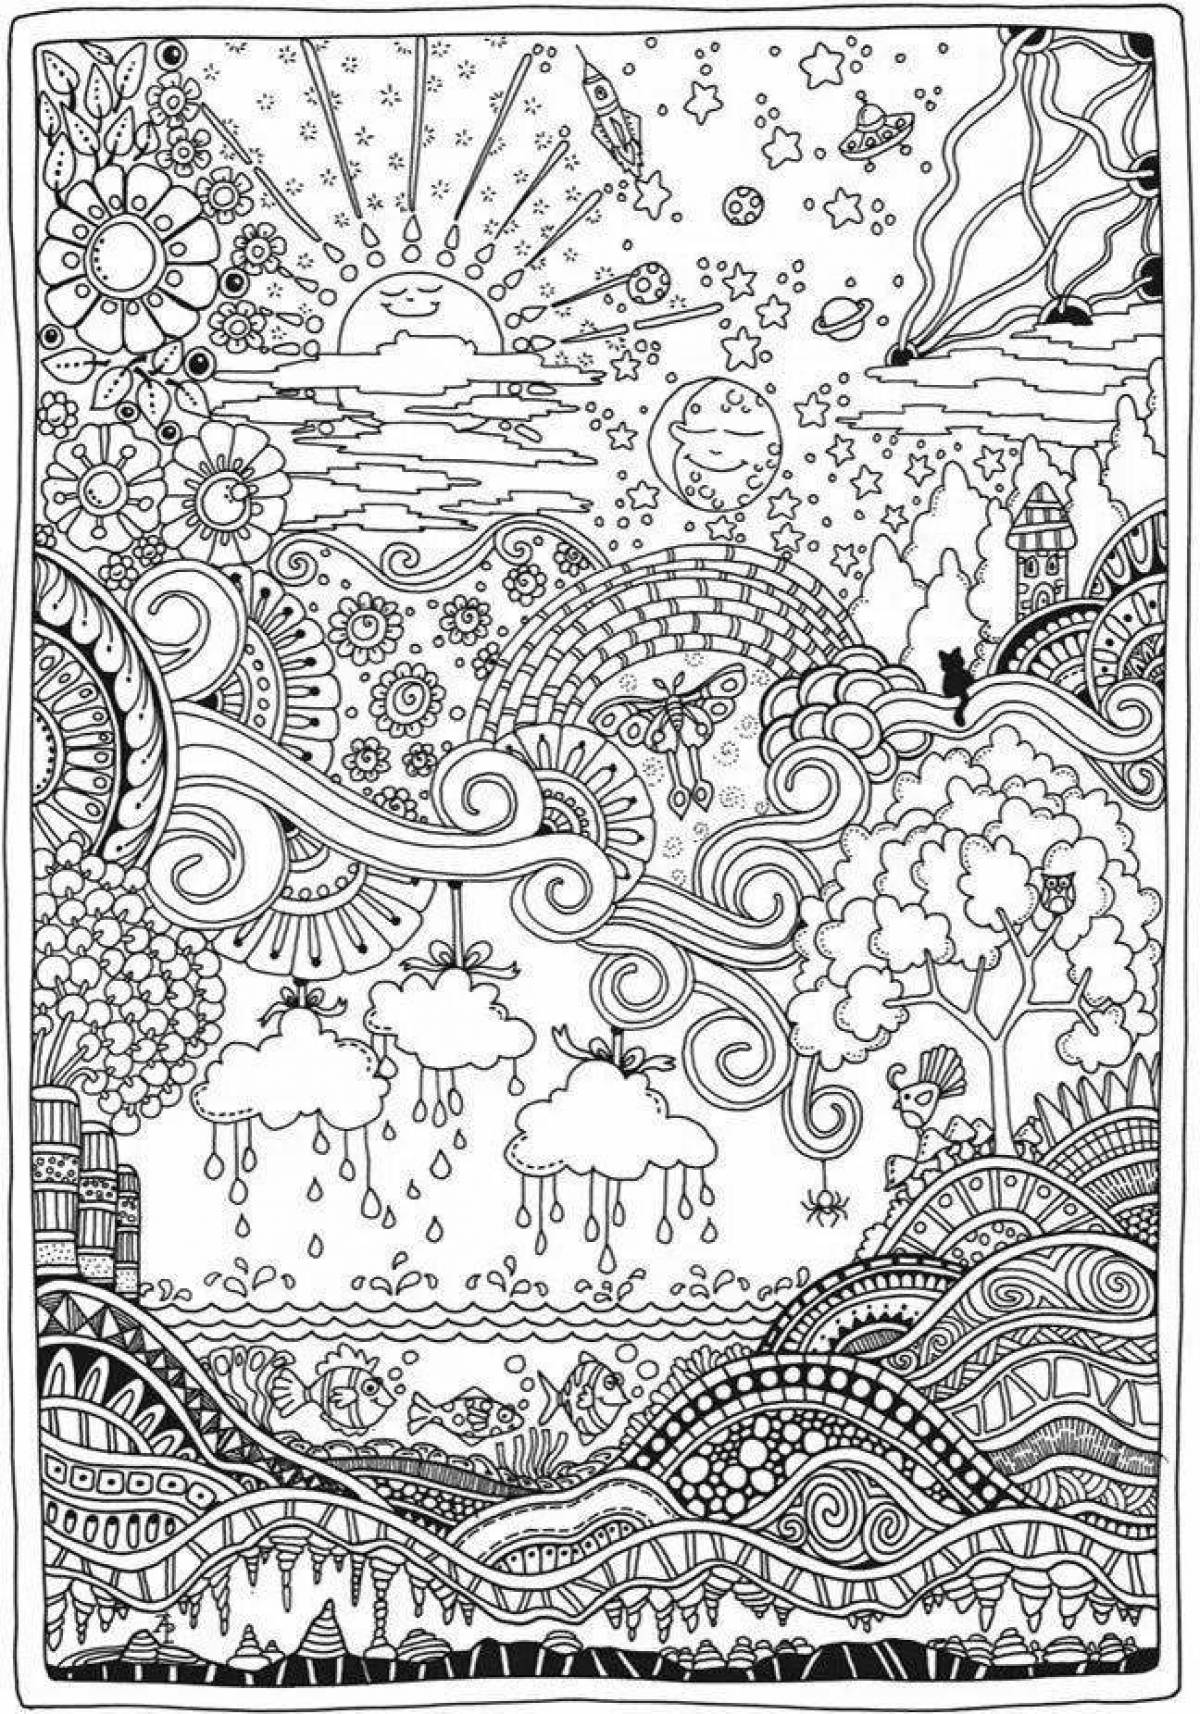 Fancy coloring book for all adults